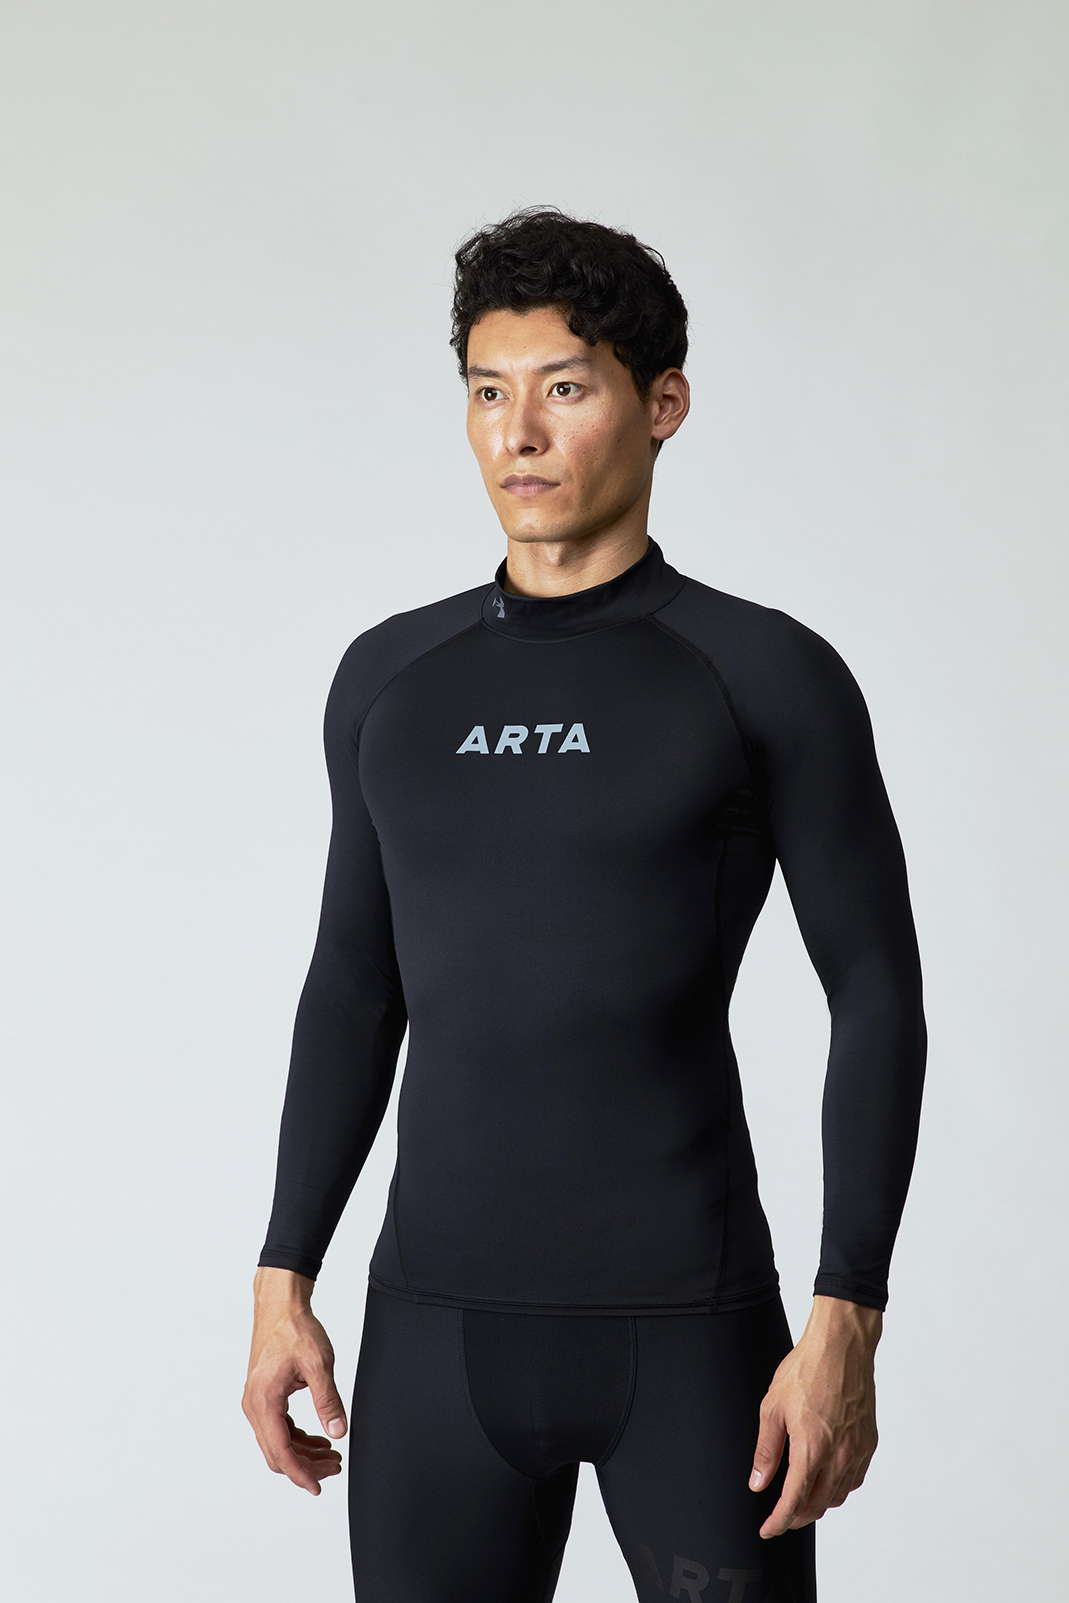 ARTA UNDER ARMOUR<br/>パワーアーマー ロングスリーブ SIZE:S/M/L/XL 4,630円（税抜）